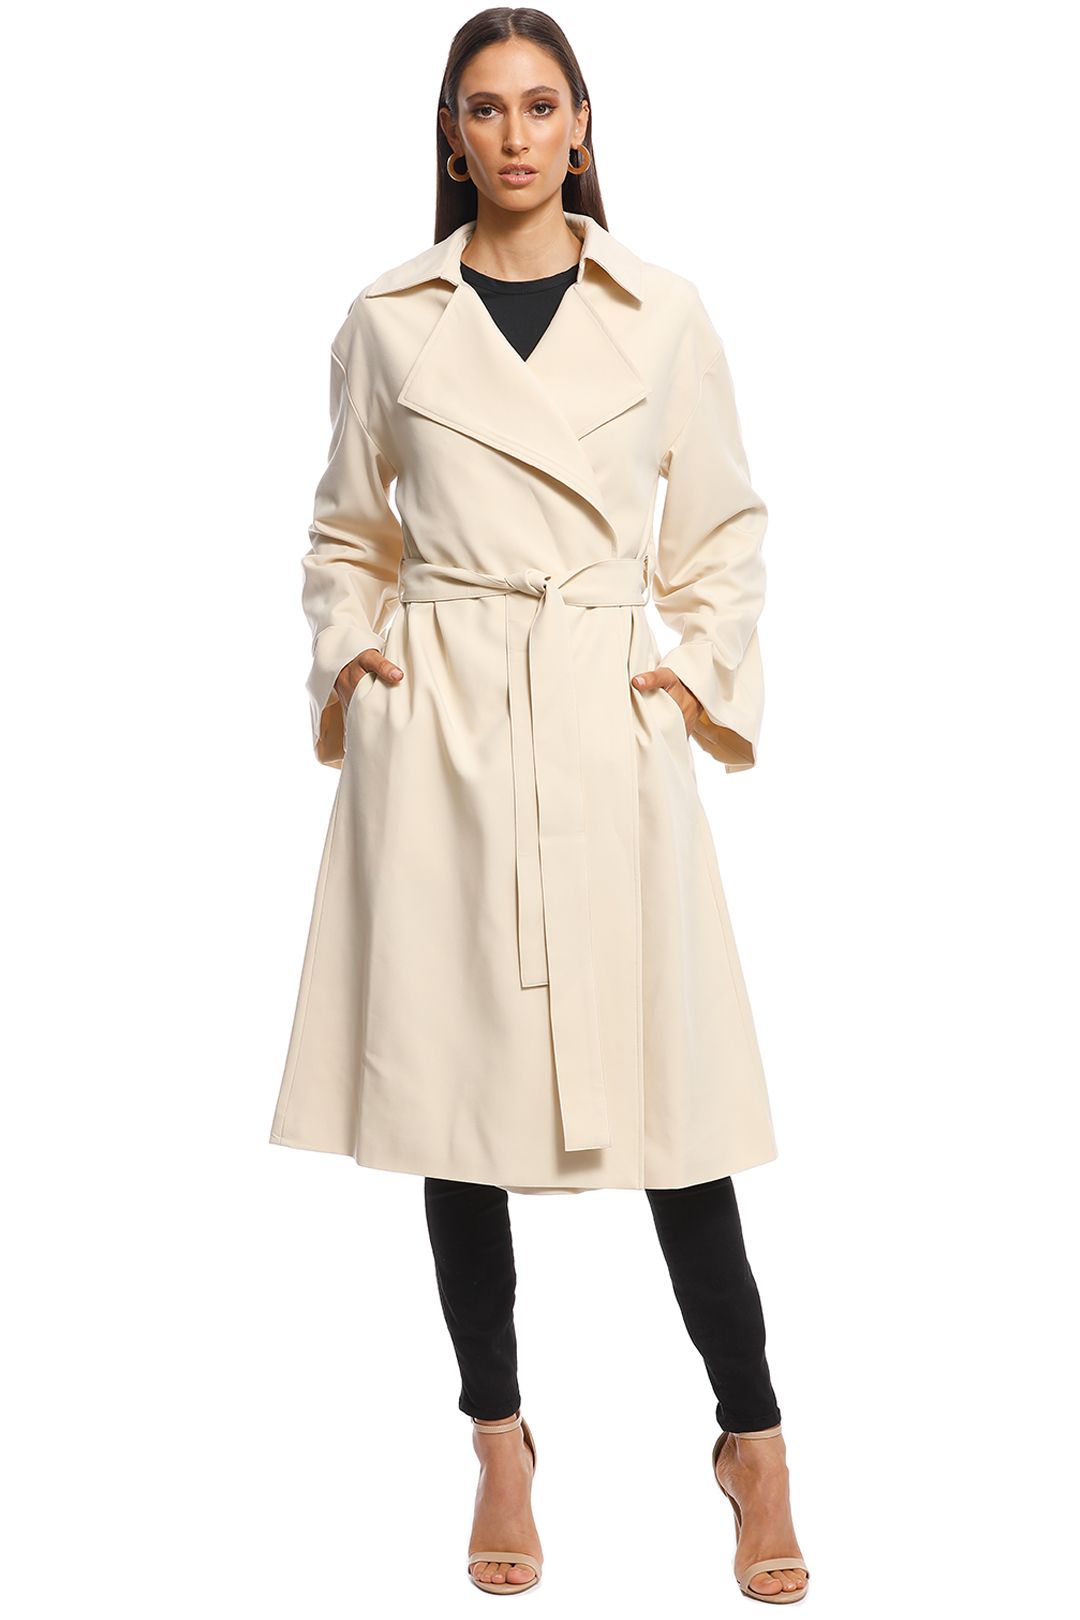 Friend of Audrey - Emerson Oversized Trench Coat - Sand - Front